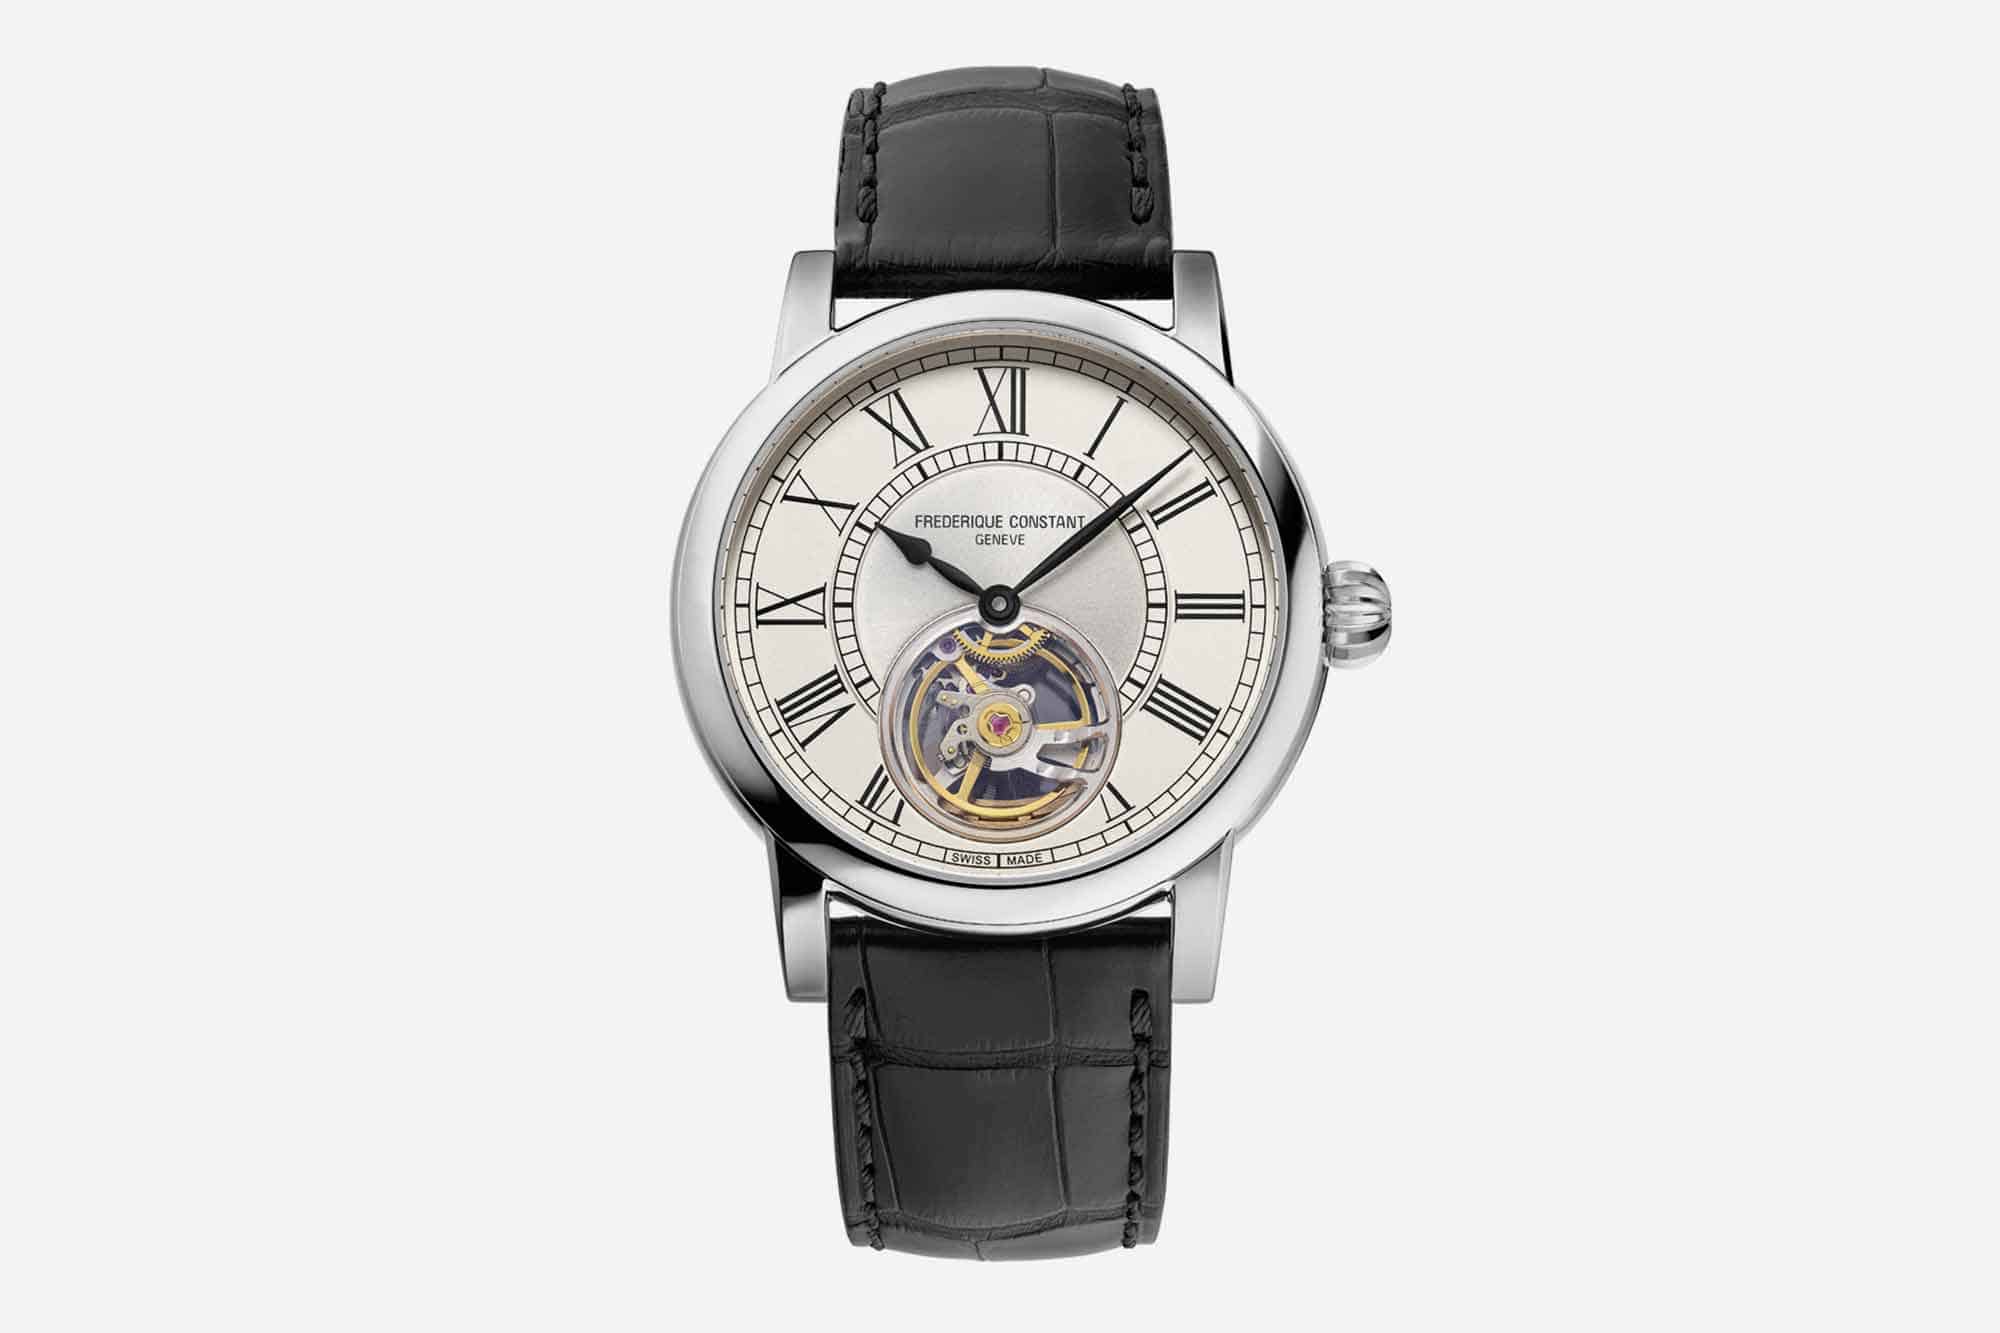 Frederique Constant Unveils Limited Edition Versions of their Classic Open Heart